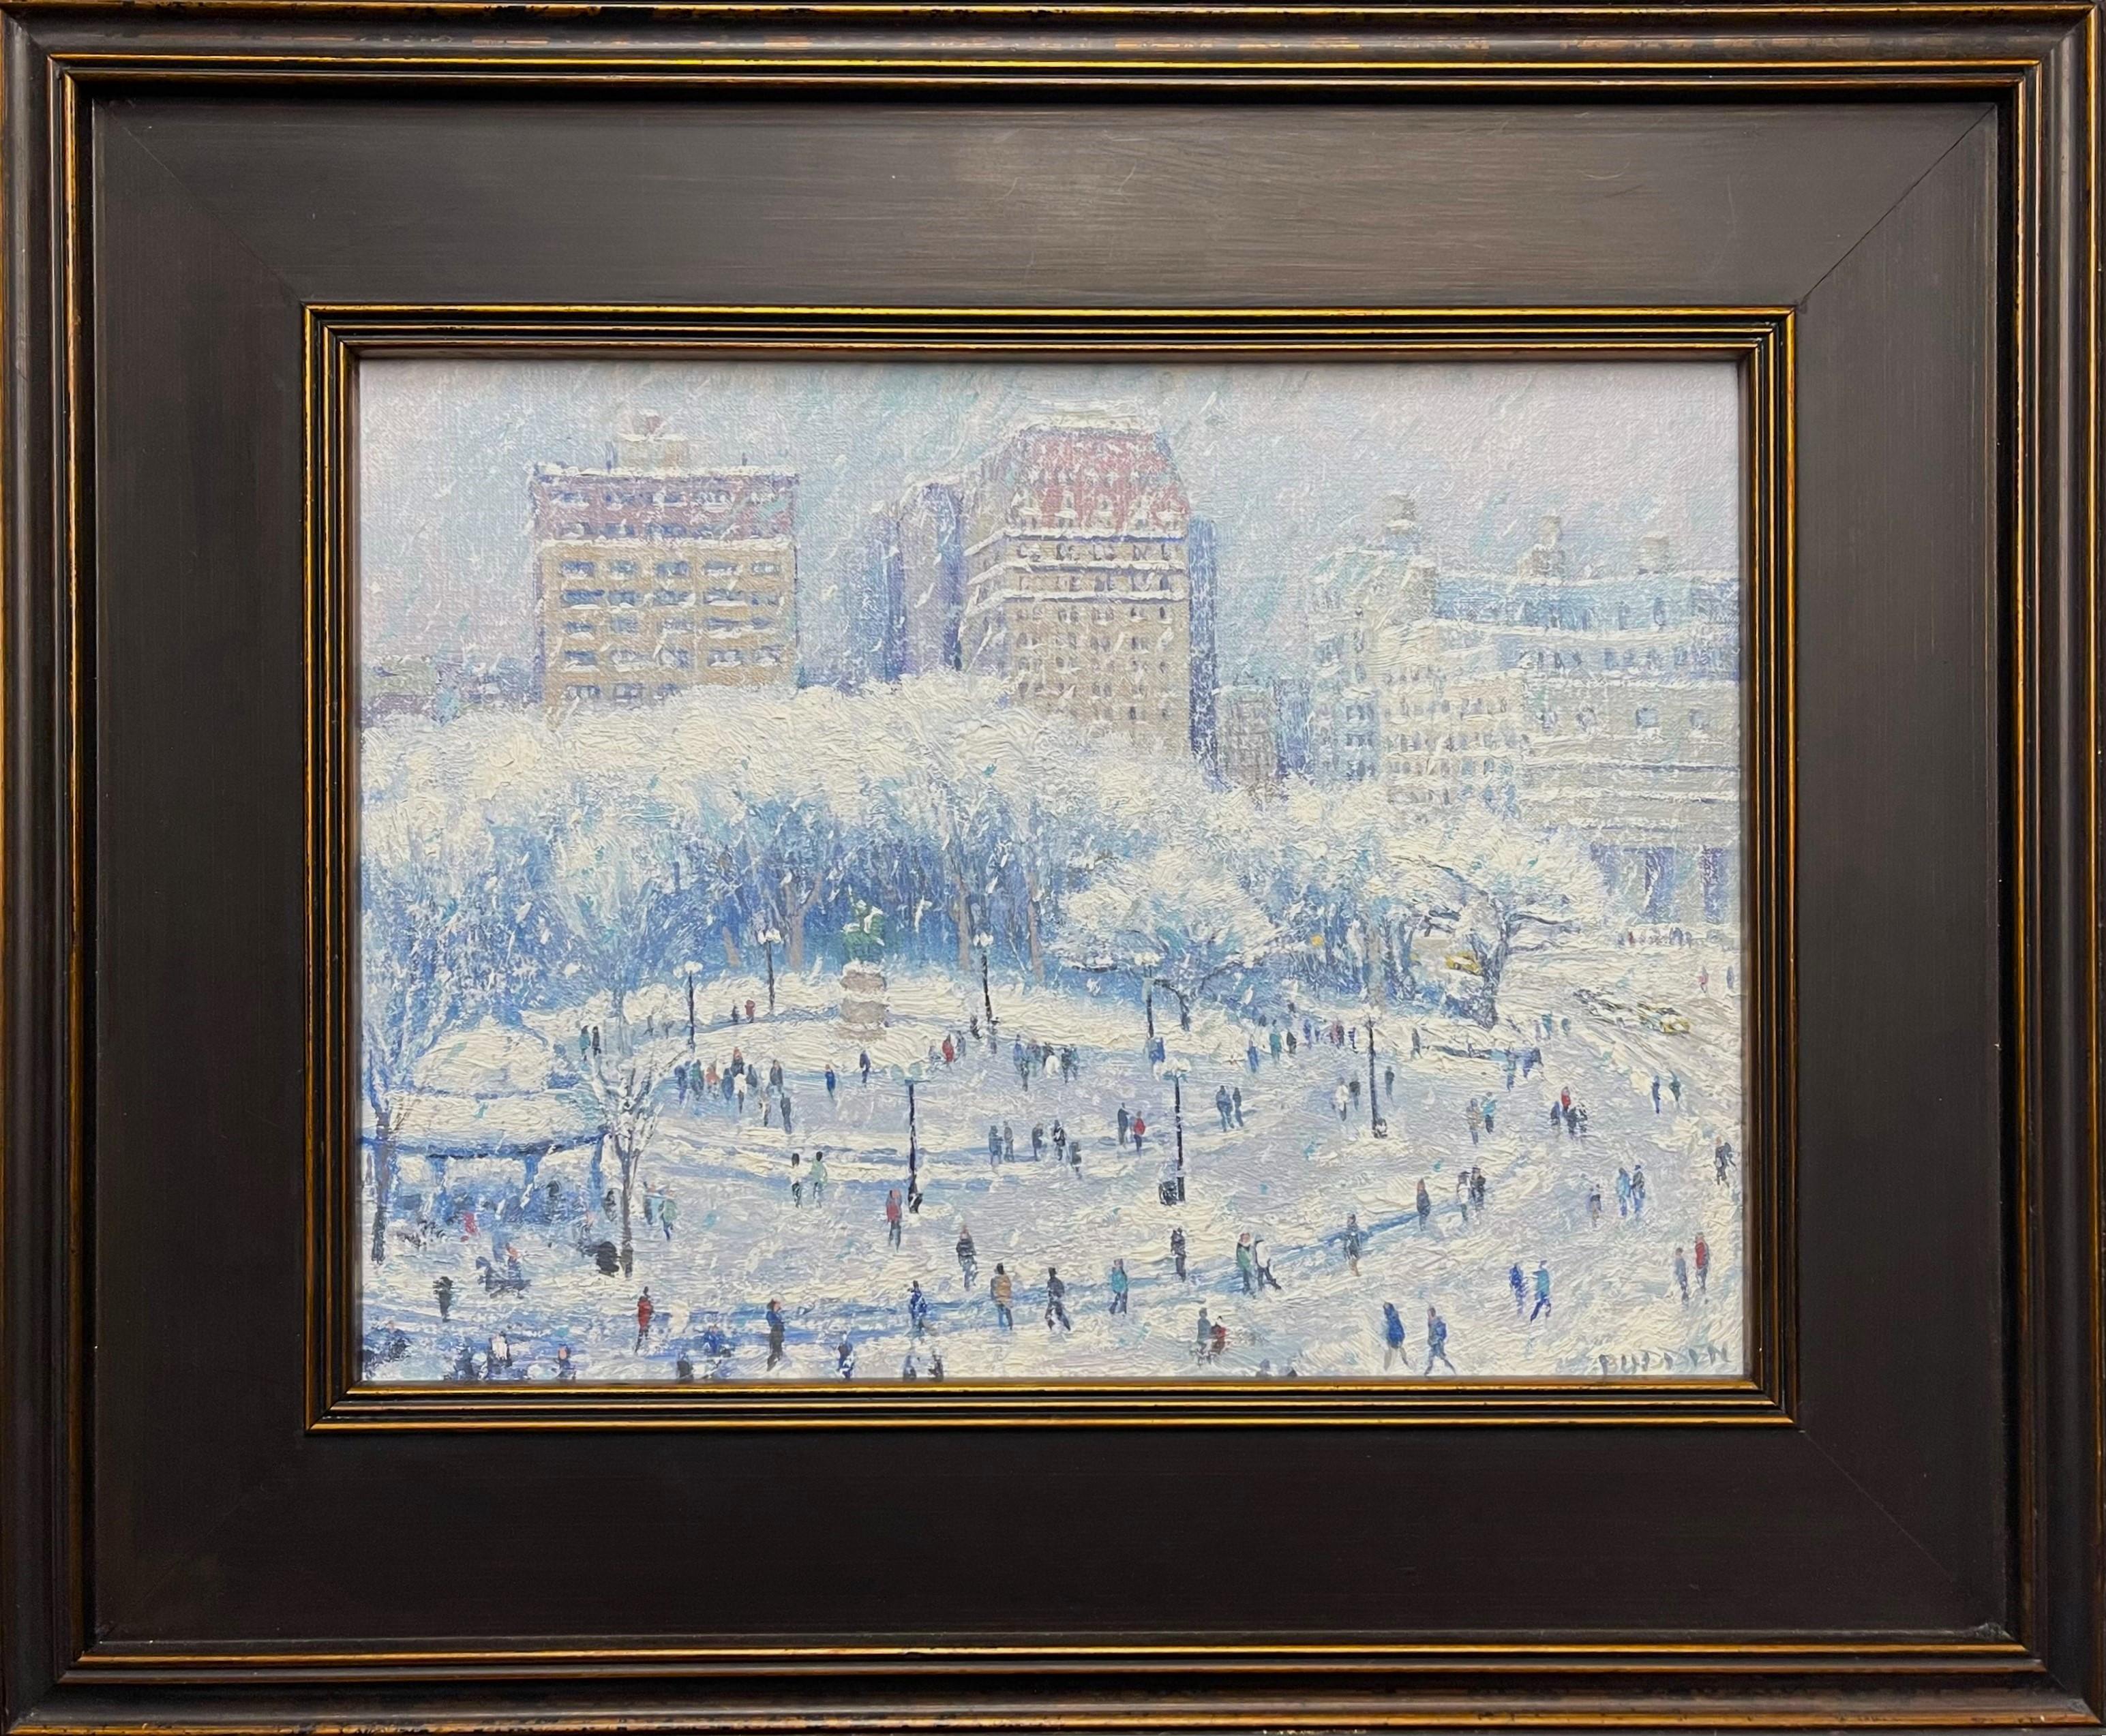 Winter Union Square
oil/panel
9 x 12 x .25 unframed
 14x17.25 framed as pictured. Frame has been touched up

Winter Union Square is an oil painting  on canvas panel by award winning contemporary artist Michael Budden that depicts an elevated view